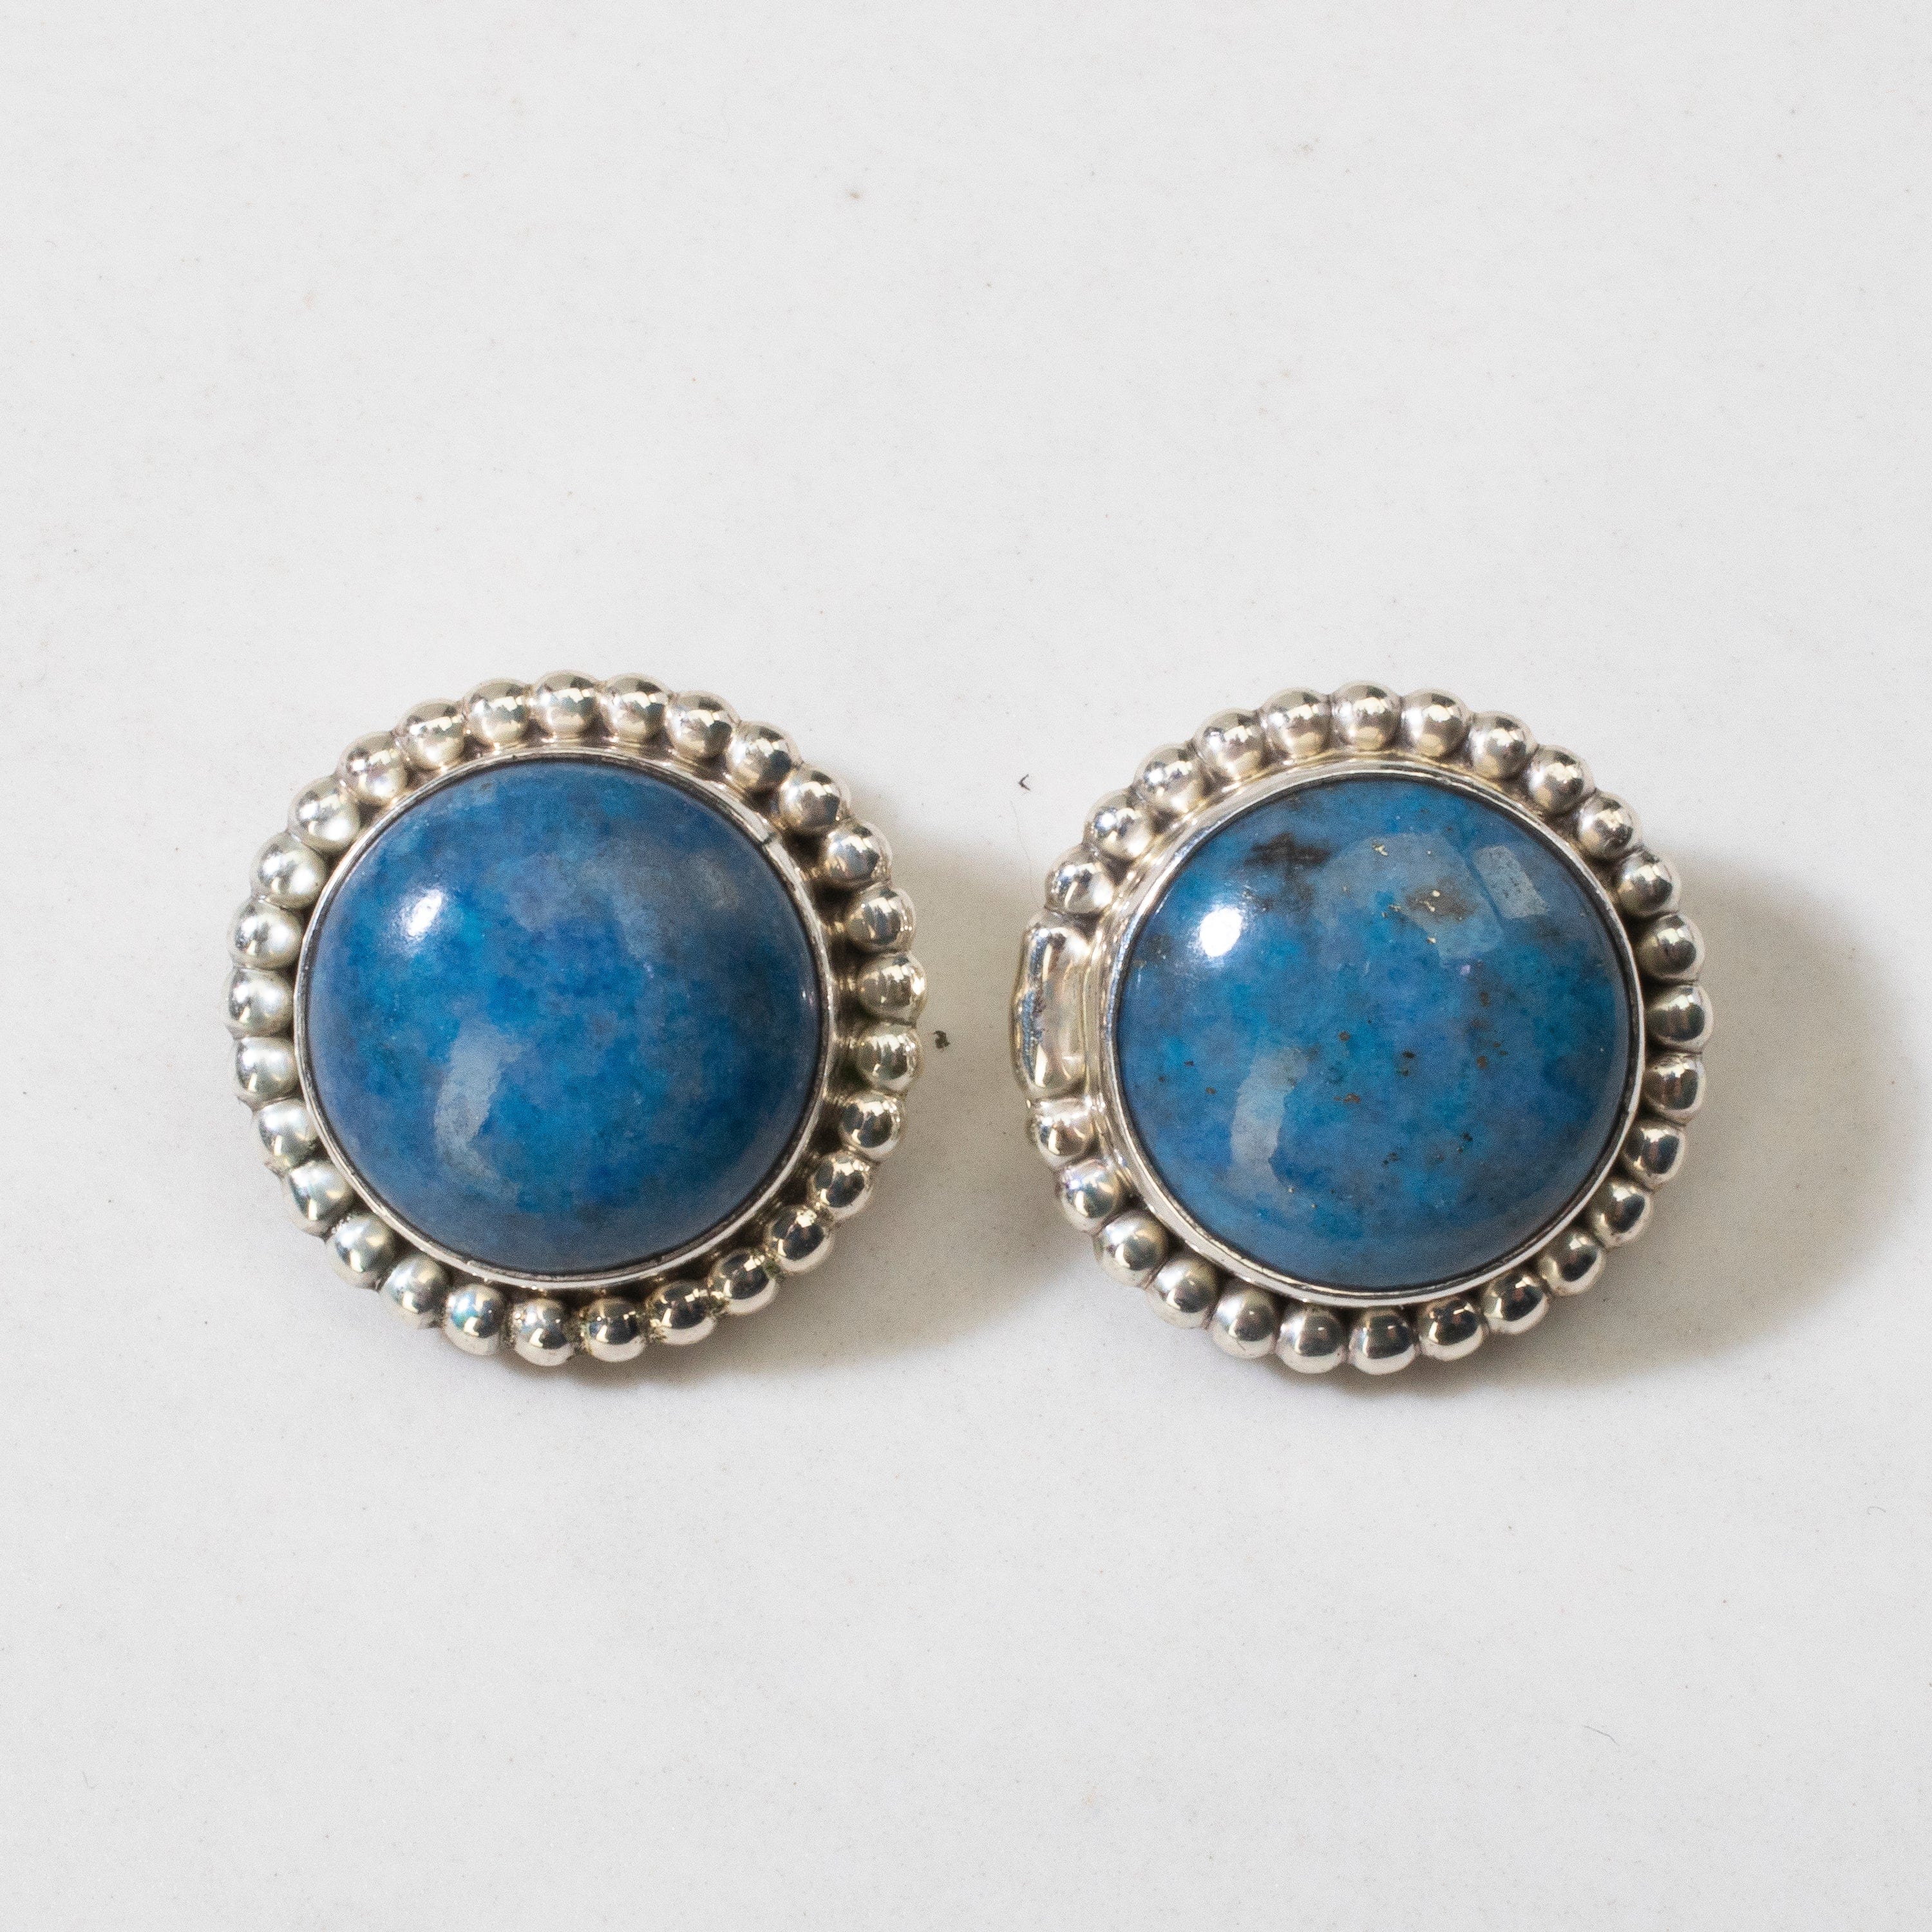 Kalifano Native American Jewelry Denim Lapis Round Navajo USA Native American Made 925 Sterling Silver Earrings with Clip On Backing NAE300.031